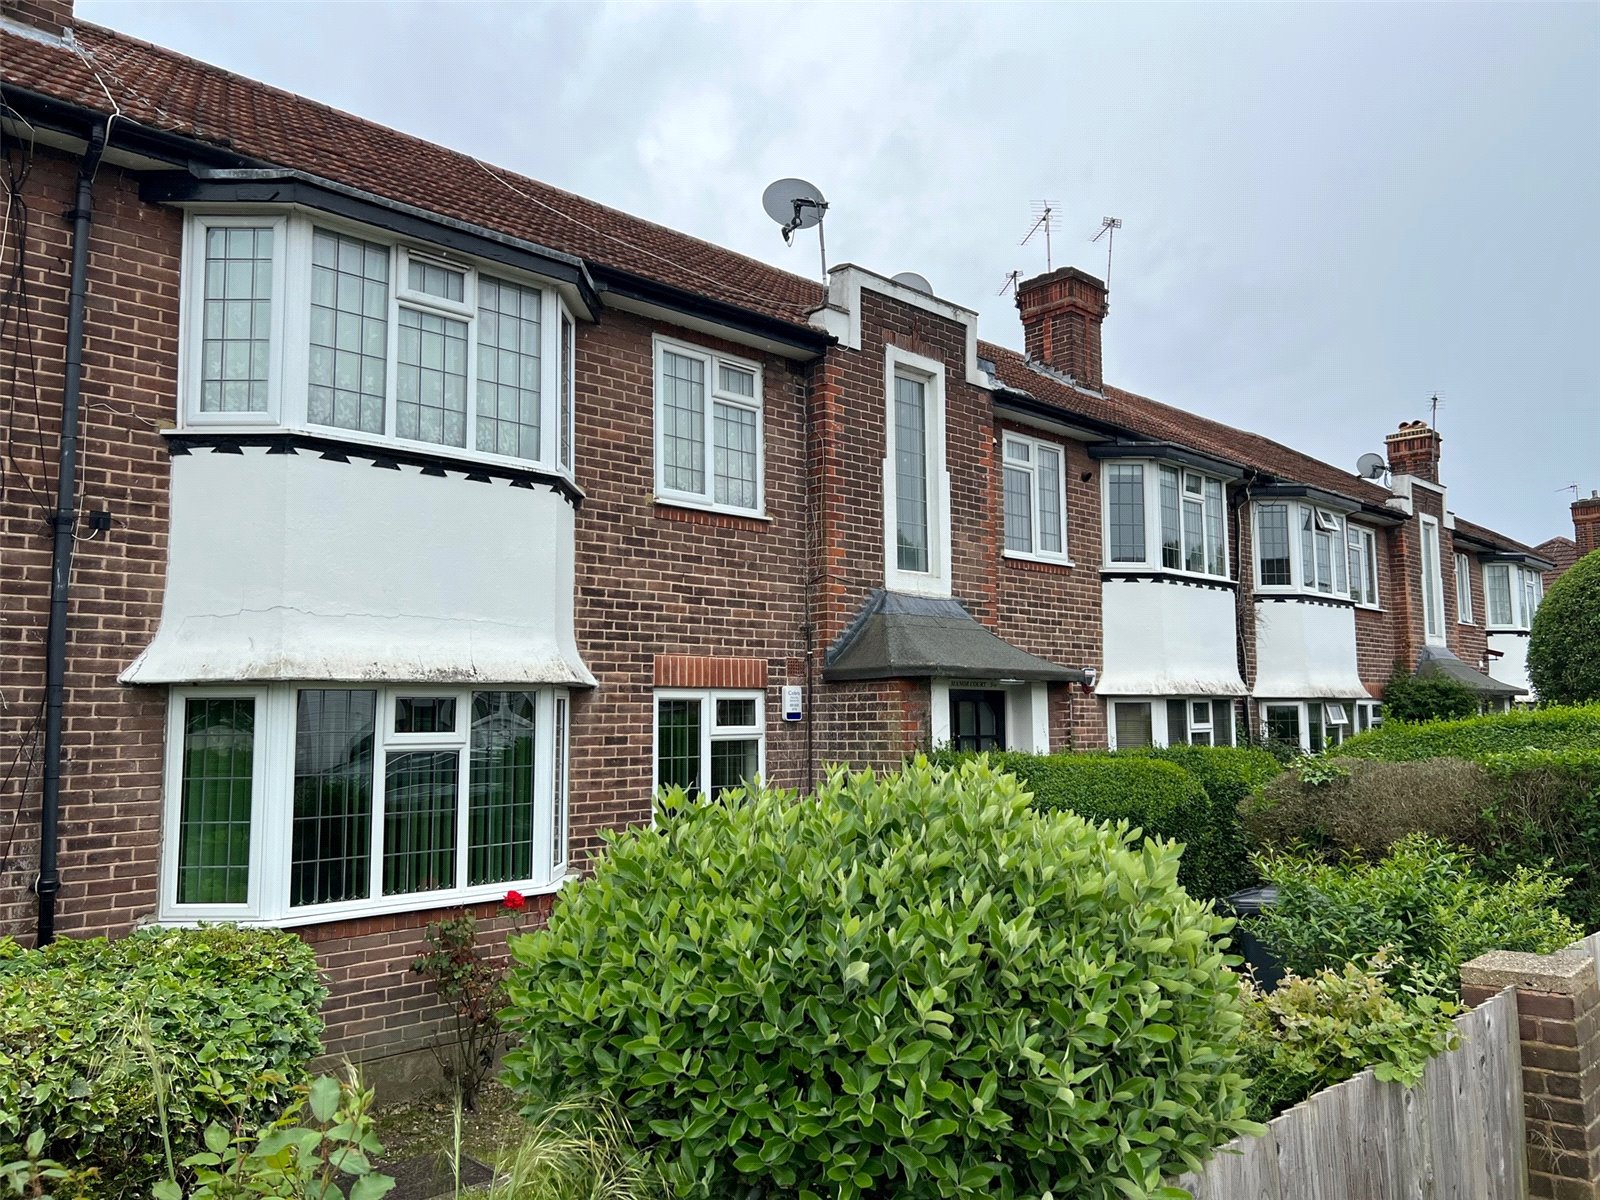 2 bed apartment to rent in York Way, Whetstone, N20 